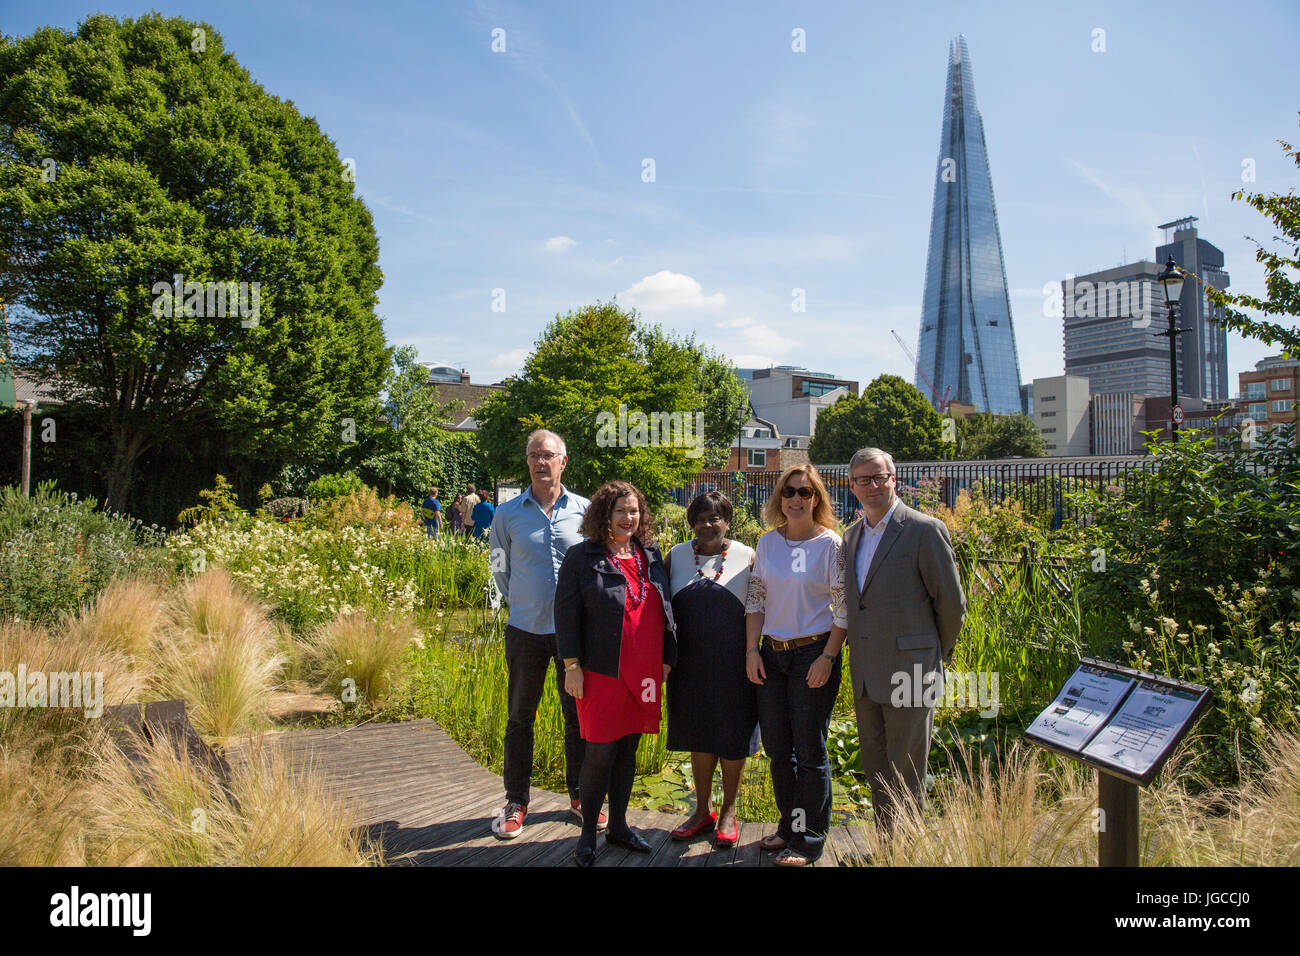 London, UK. 5th July, 2017. The London Assembly Environment Committee launches its report 'Park life: ensuring green spaces remain a hit with Londoners’ at Red Cross Garden, an historic and award-winning park restored to its original Victorian design. L-R: Paul Ely (Director, Bankside Open Spaces Trust), Leonie Cooper AM (Chair, London Assembly Environment Committee), Jennette Arnold AM OBE, Megan Greenwood (local resident and volunteer) and Joseph Bonner (trustee). Credit: Mark Kerrison/Alamy Live News Stock Photo